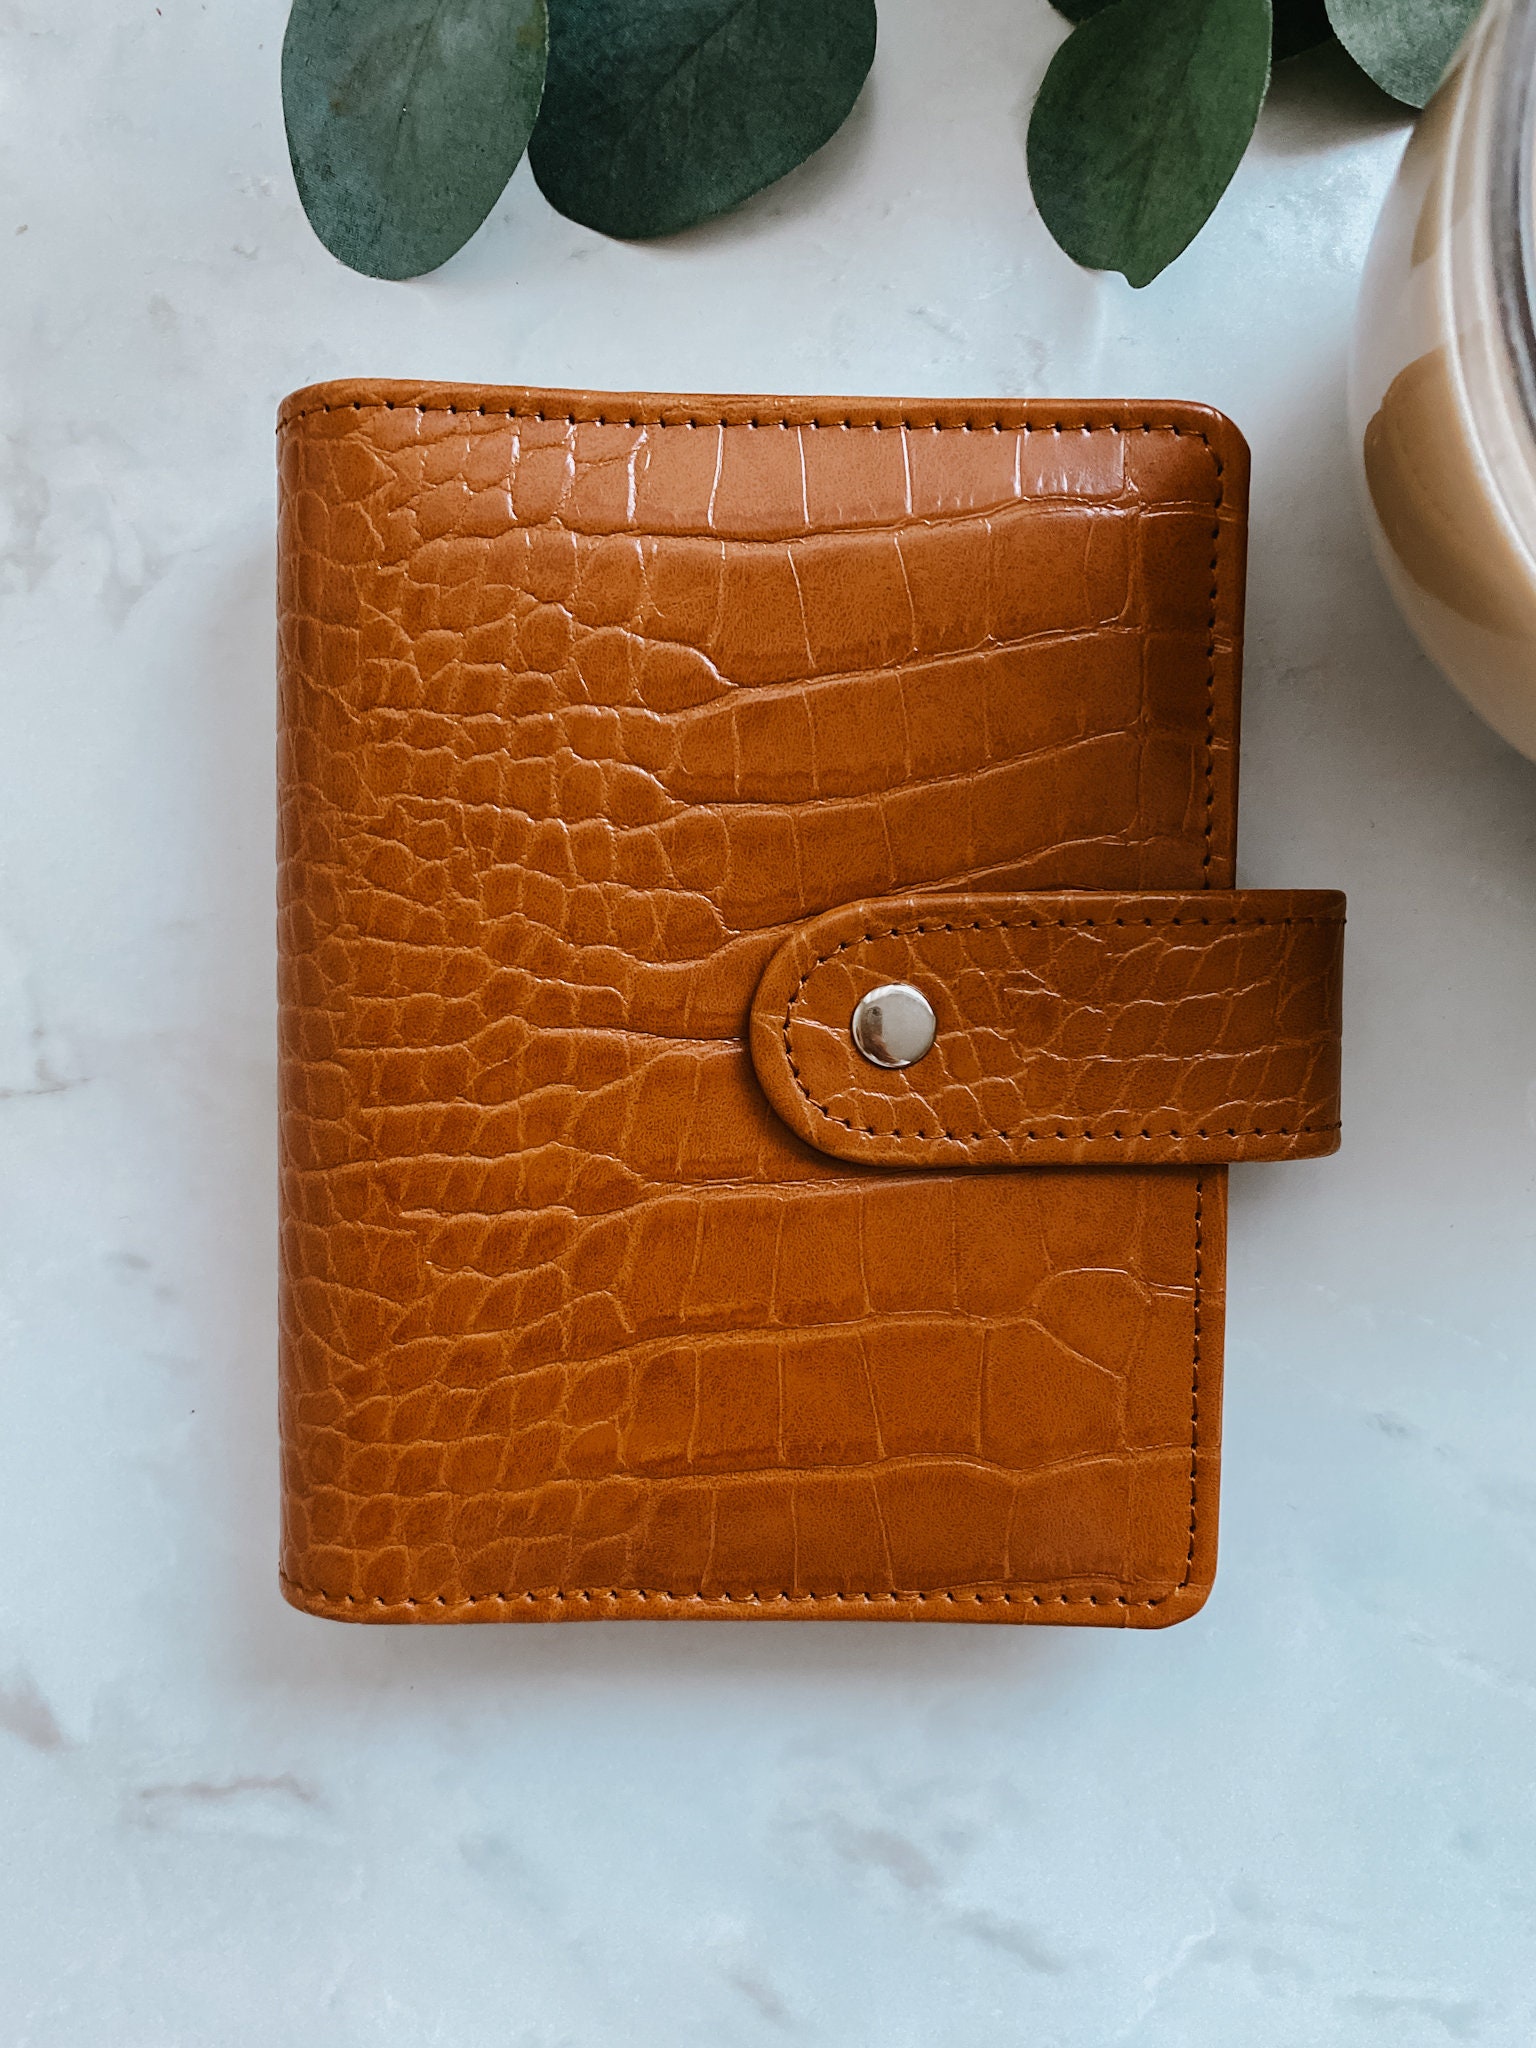 setting up a moterm A7 pocket planner as a wallet! 